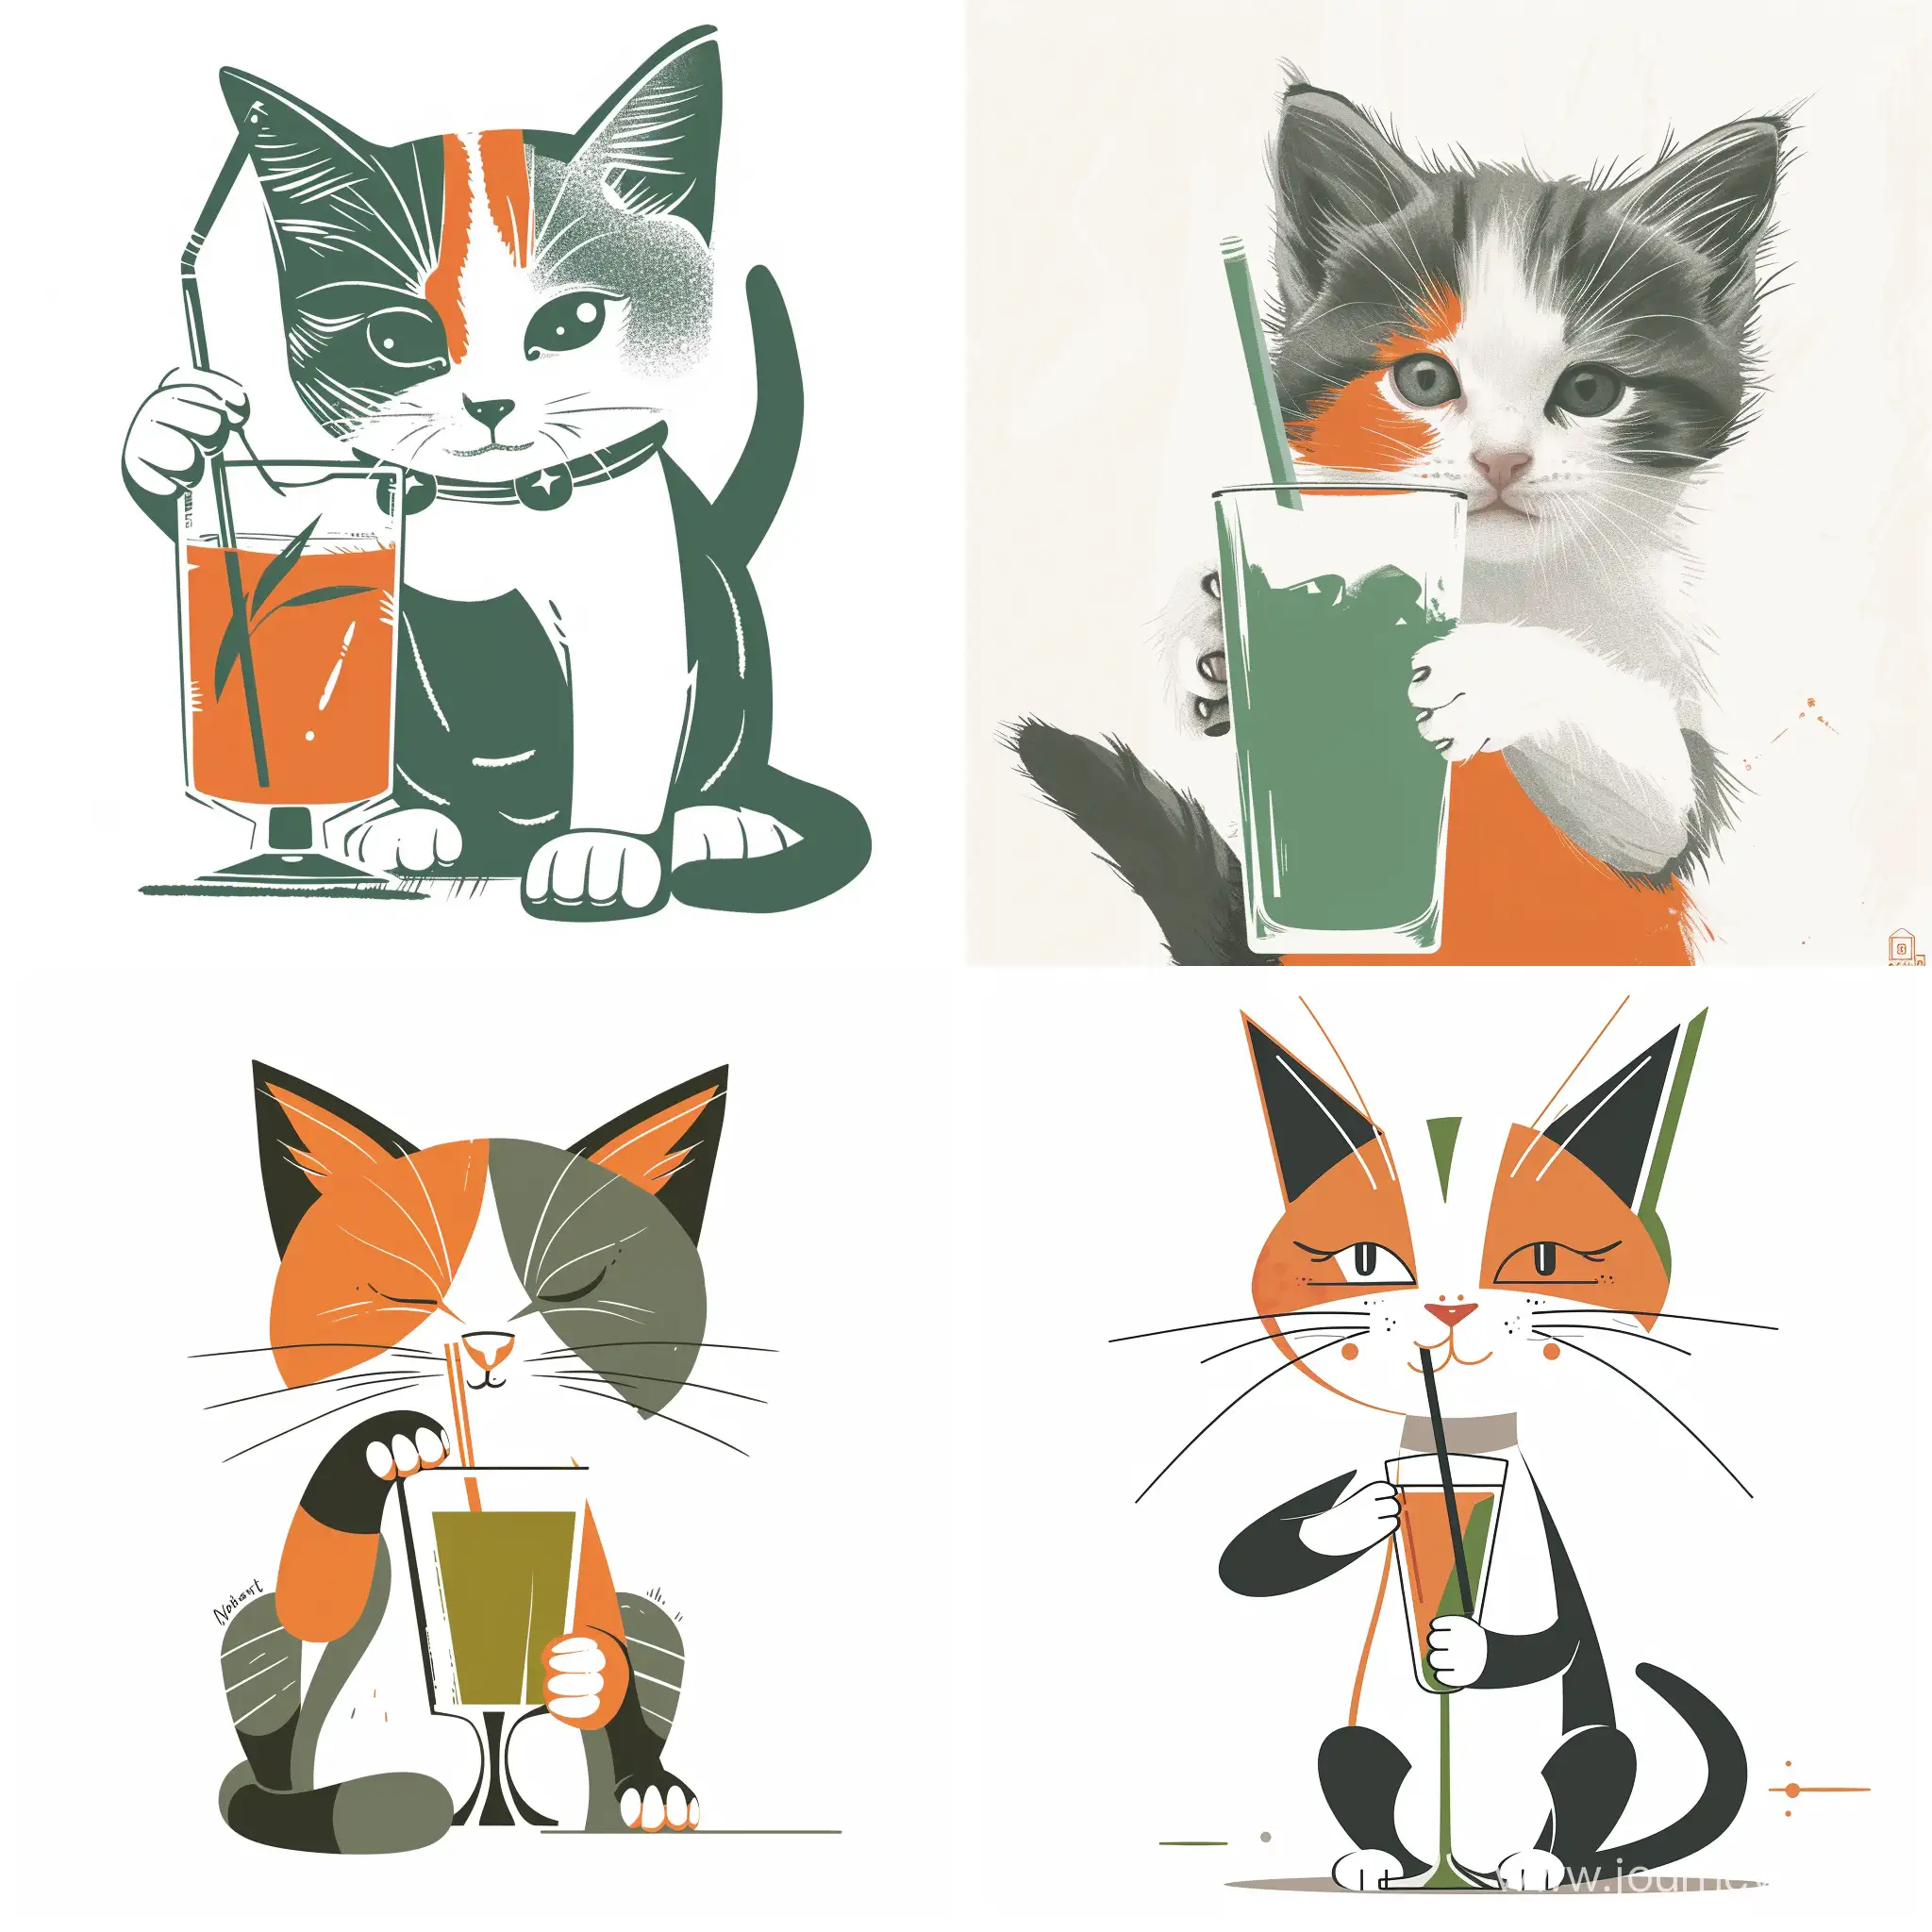 A very minimalistic monochrome kitten holding a glass with a cocktail and a straw, on a white background colors: orange, green, white, gray